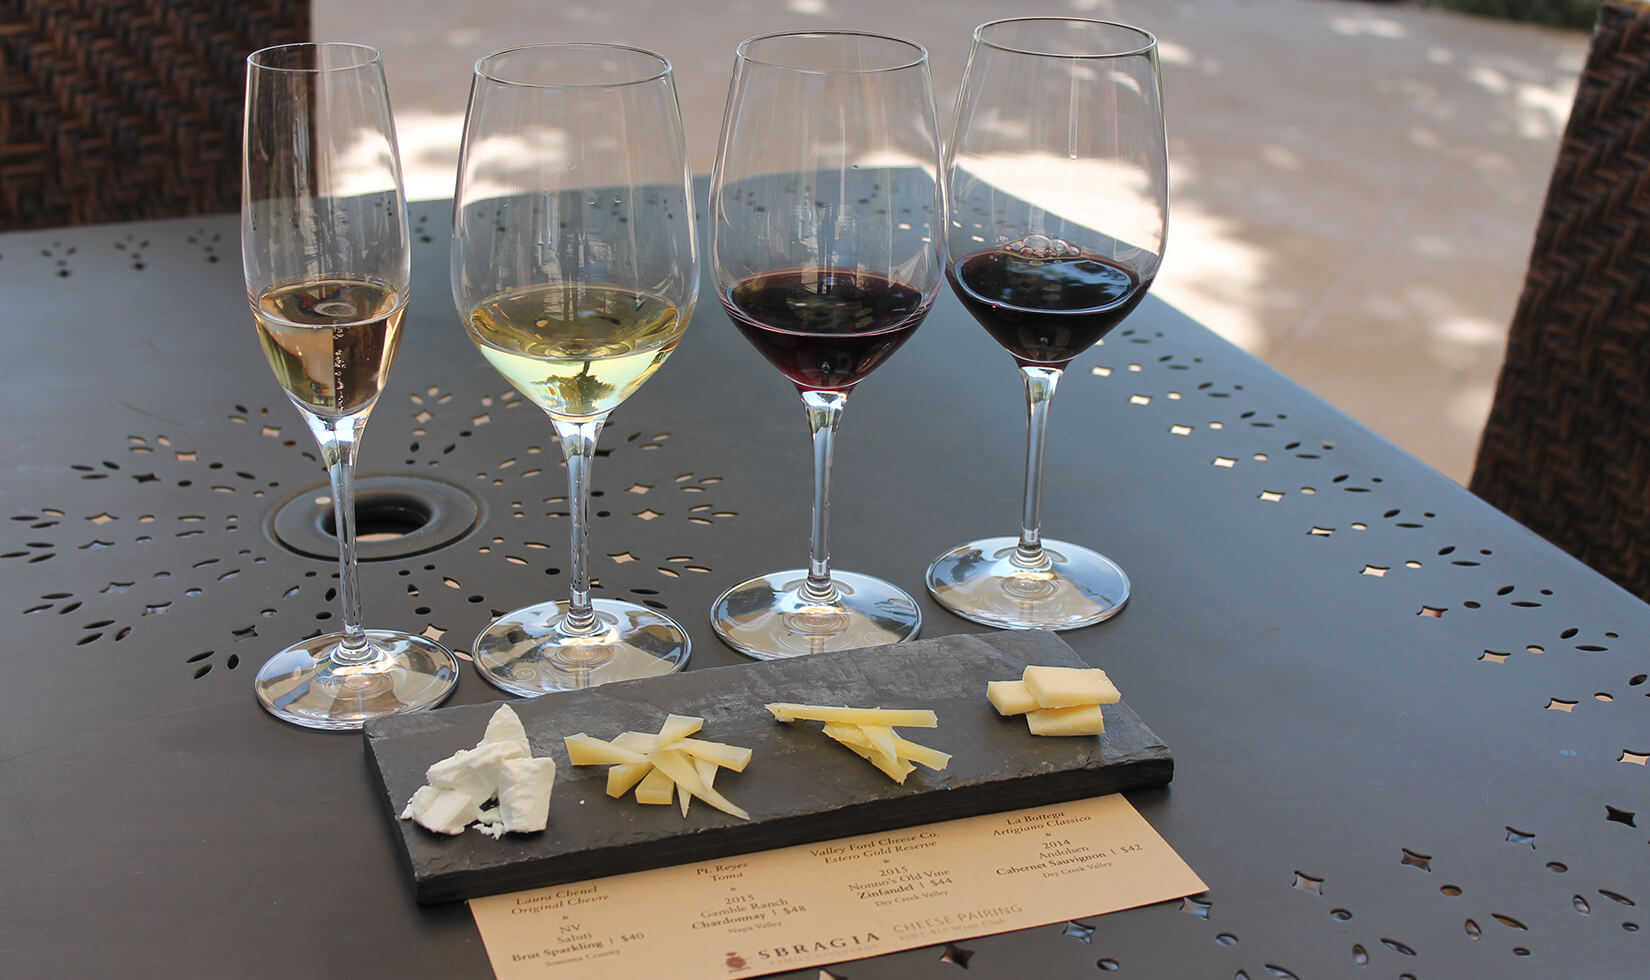 Sbragia Winery Tasting on the Terrace with Cheese Plate